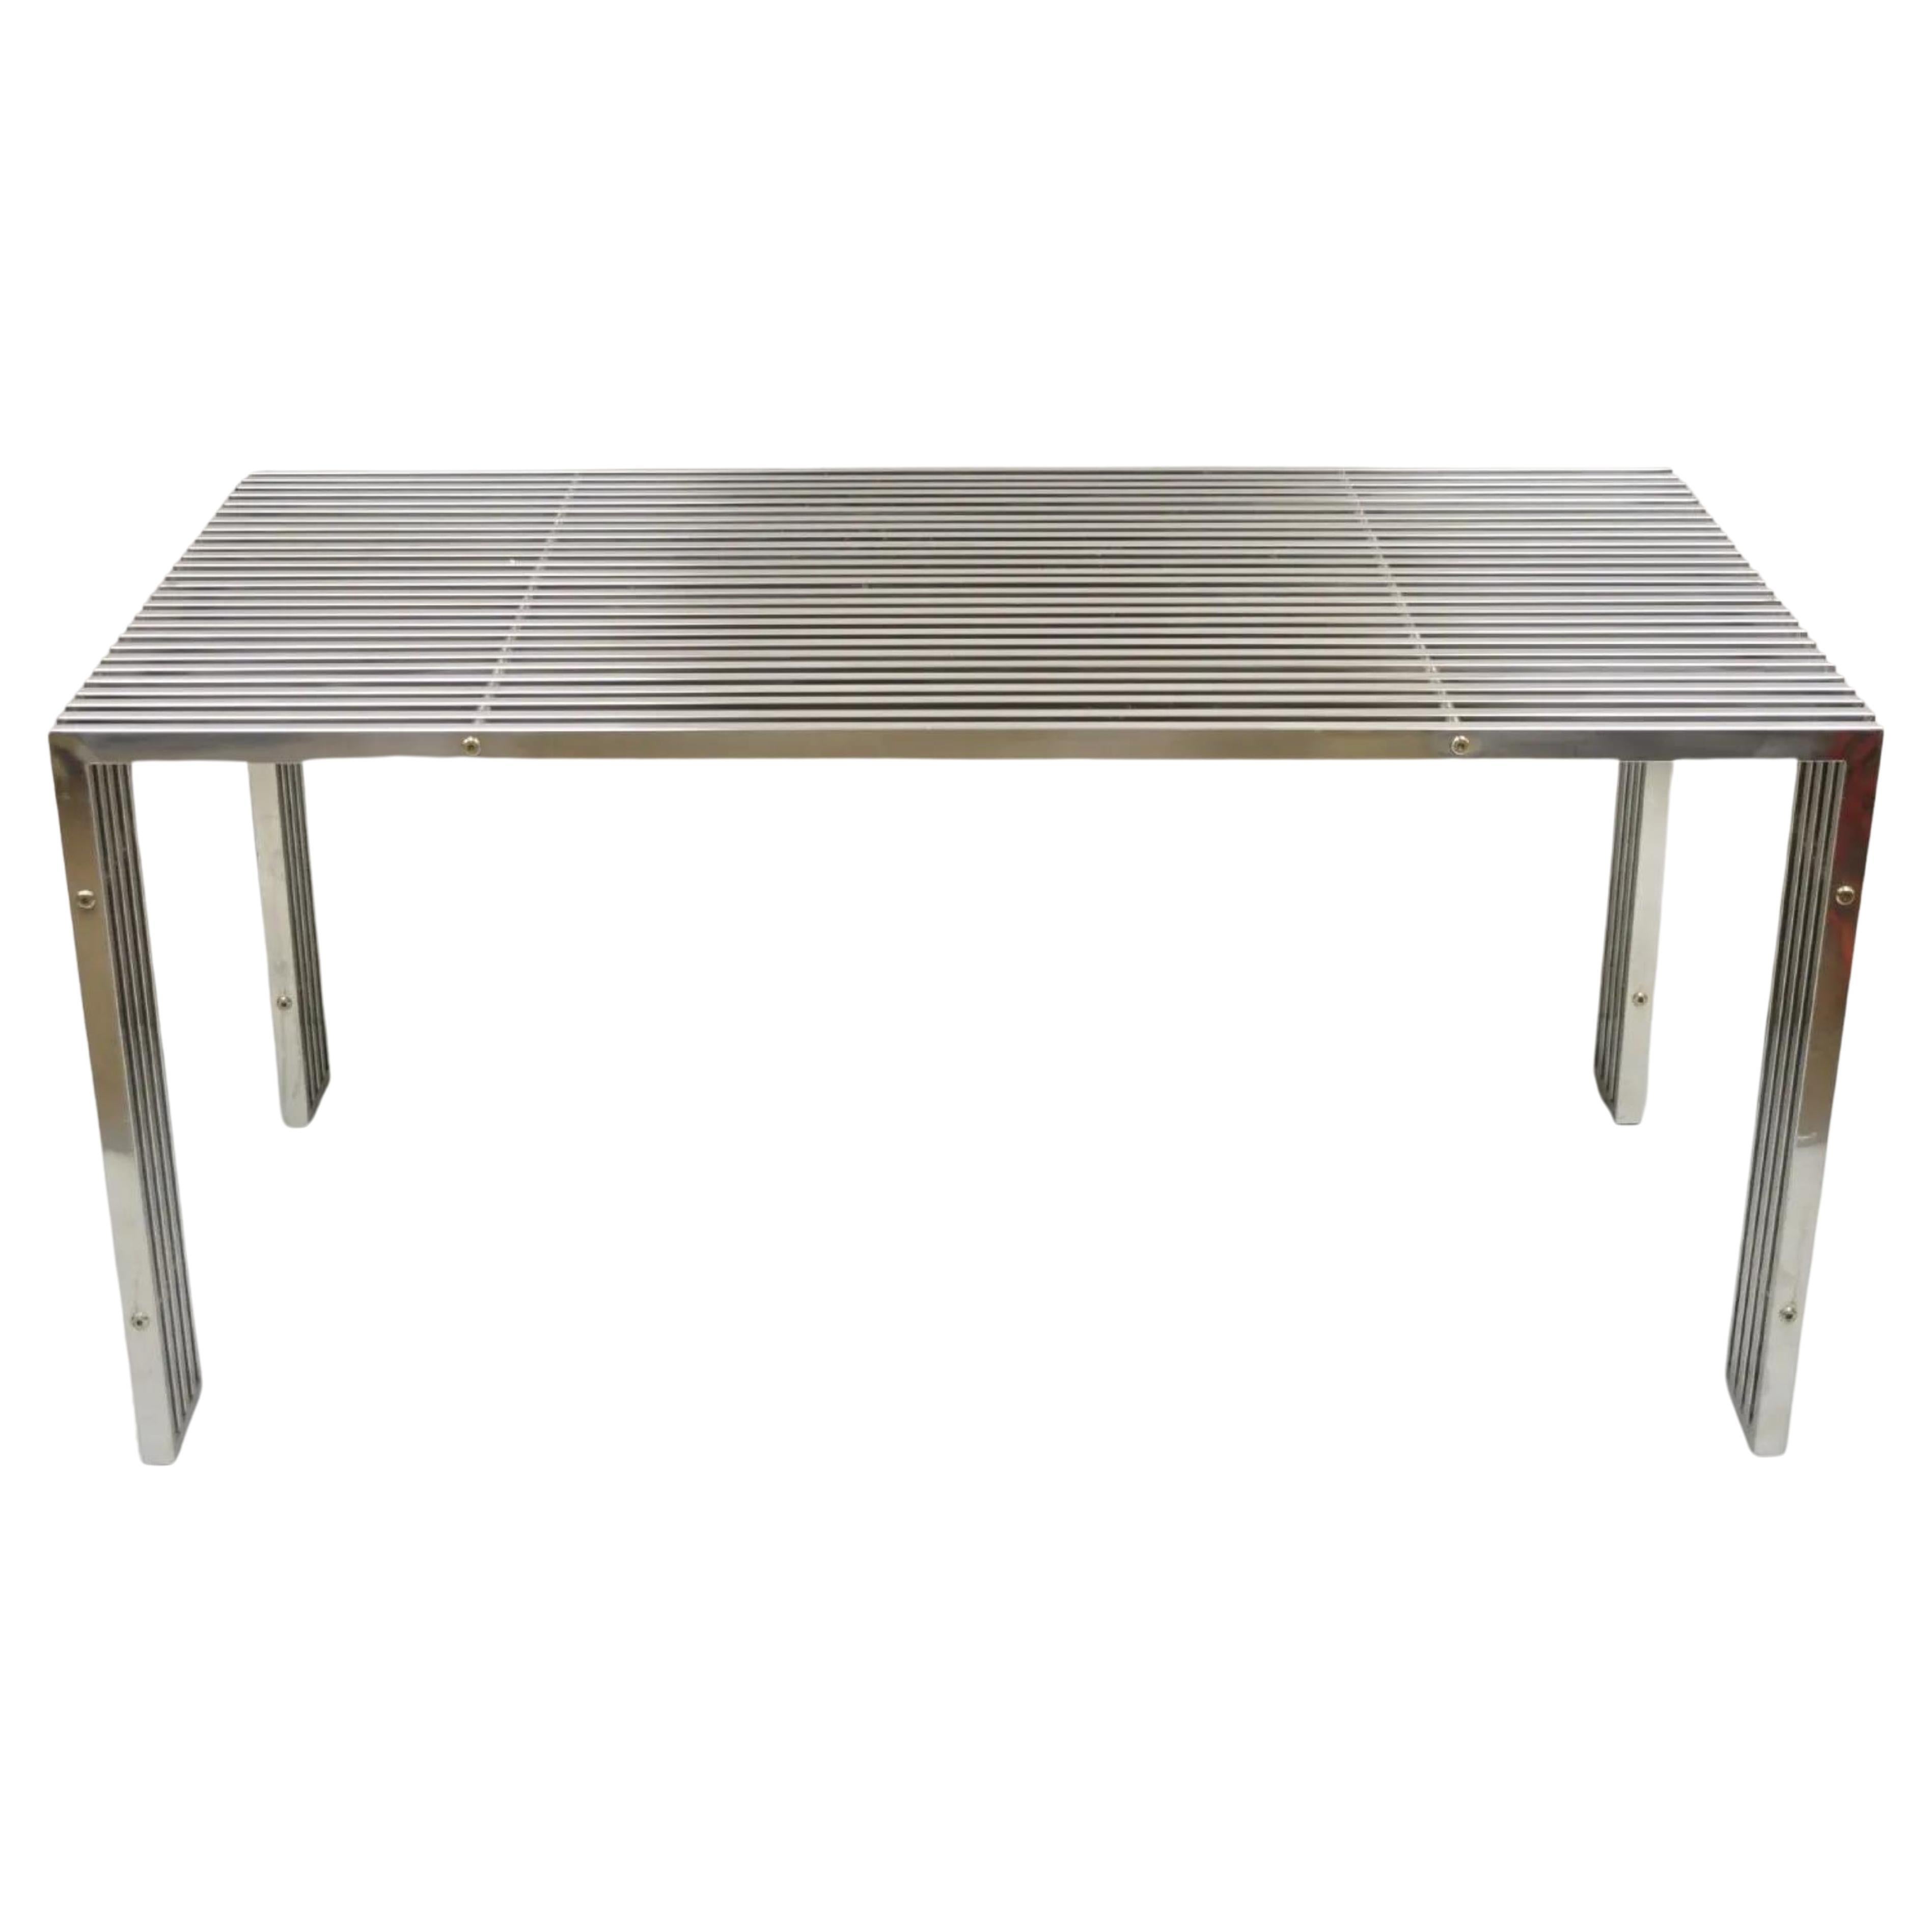 Contemporary Modern Gridiron Stainless Steel Metal Post-Modern Dining Table Desk For Sale